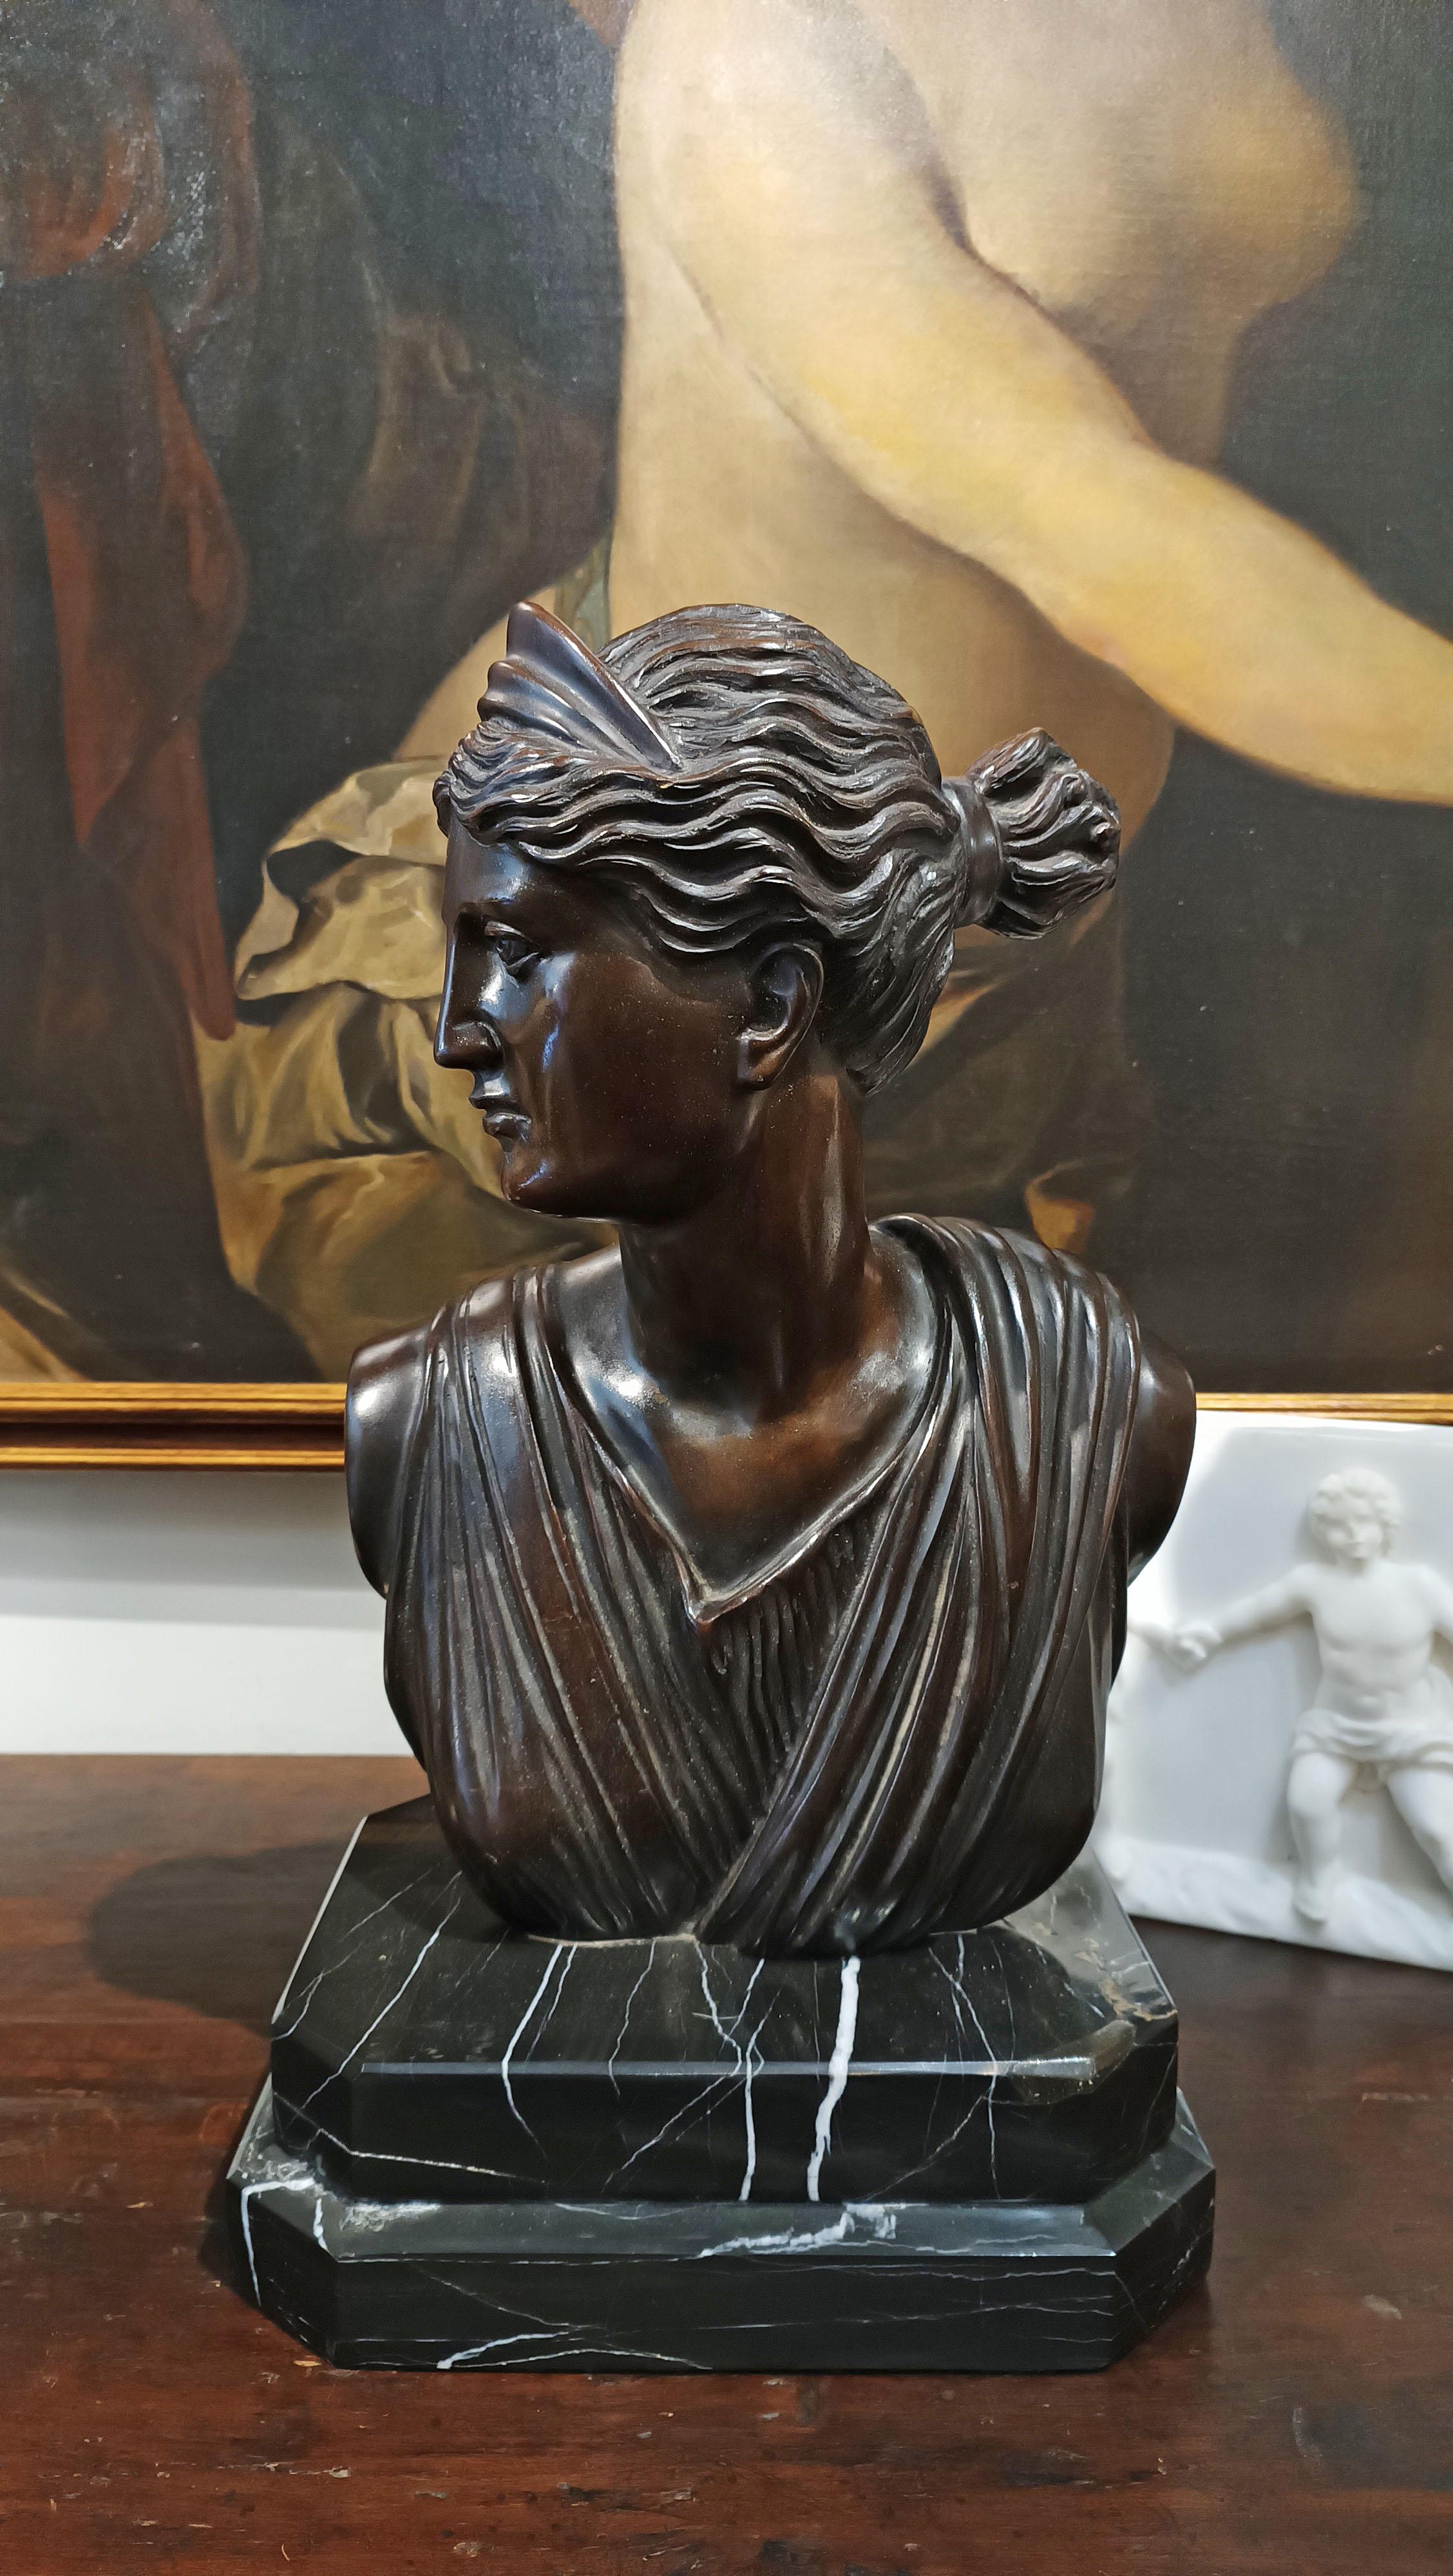 Beautiful bust made of lost wax cast bronze, depicting the goddess of hunting Diana. The work recalls the style of classical art, showing the goddess in profile, with her hair gathered in a chignon and adorned with the traditional diadem above her